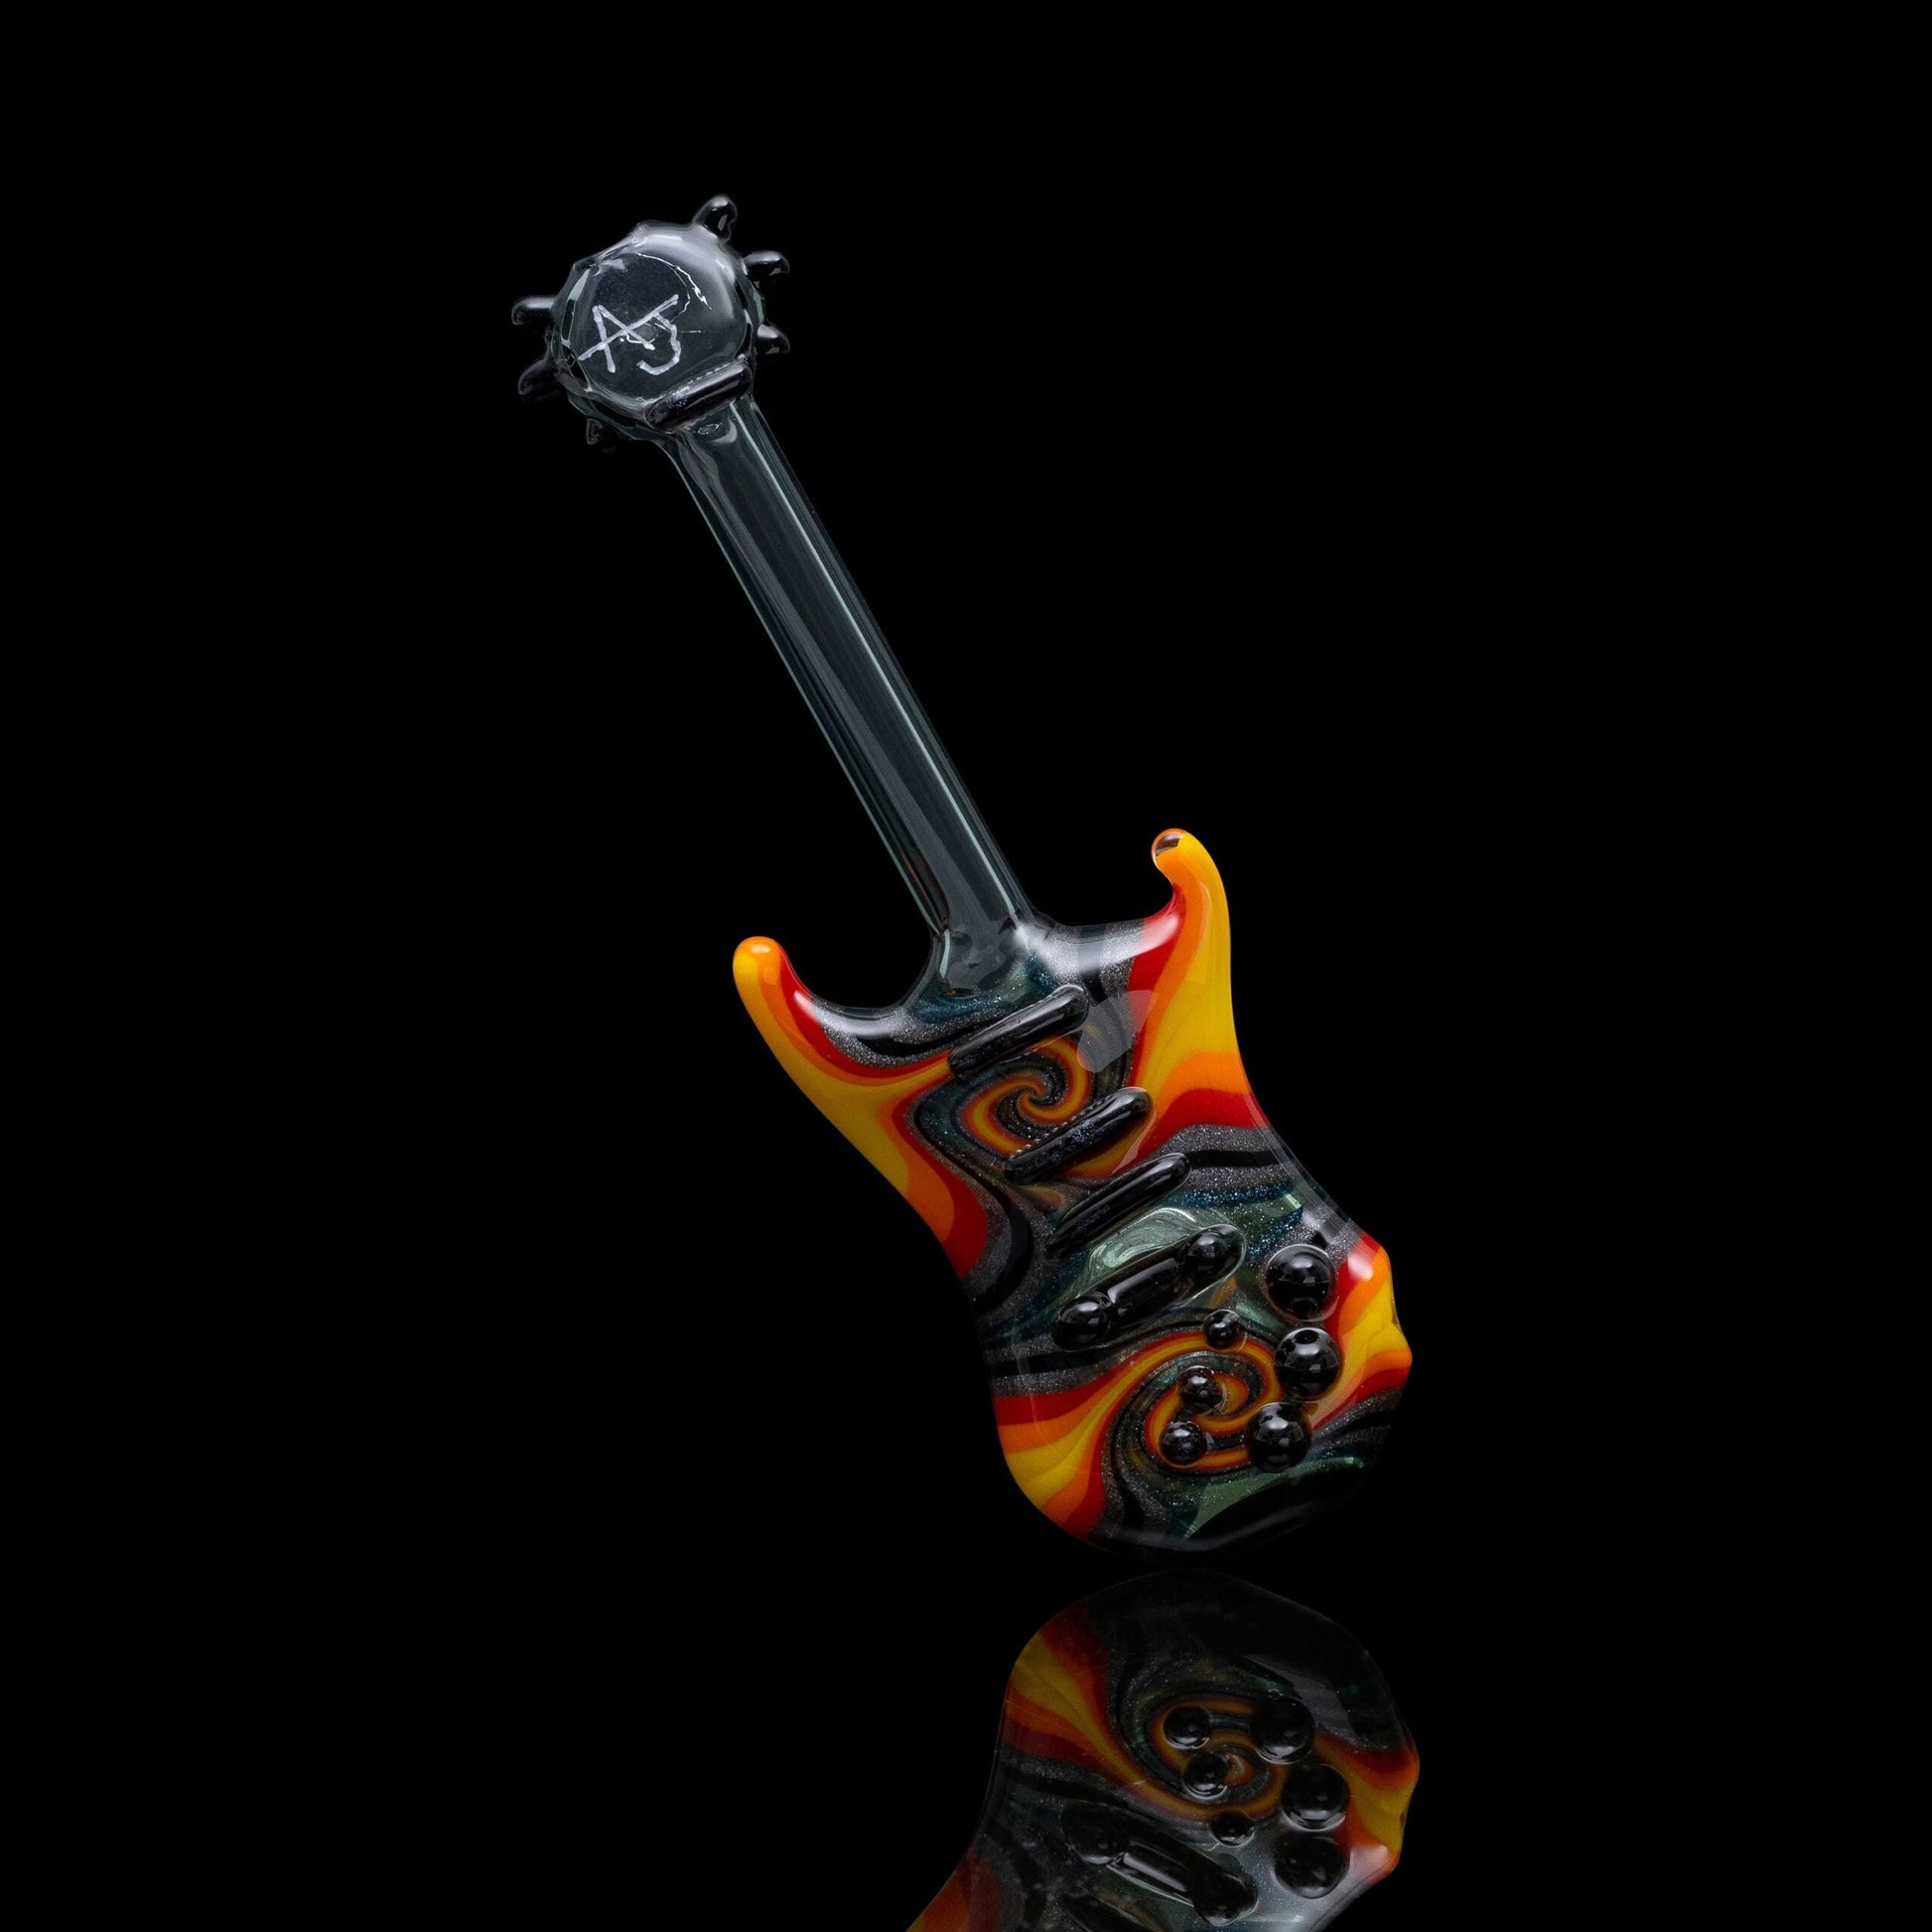 meticulously crafted design of the Wig Wag Guitar Pipe (I) by AJ Roberts